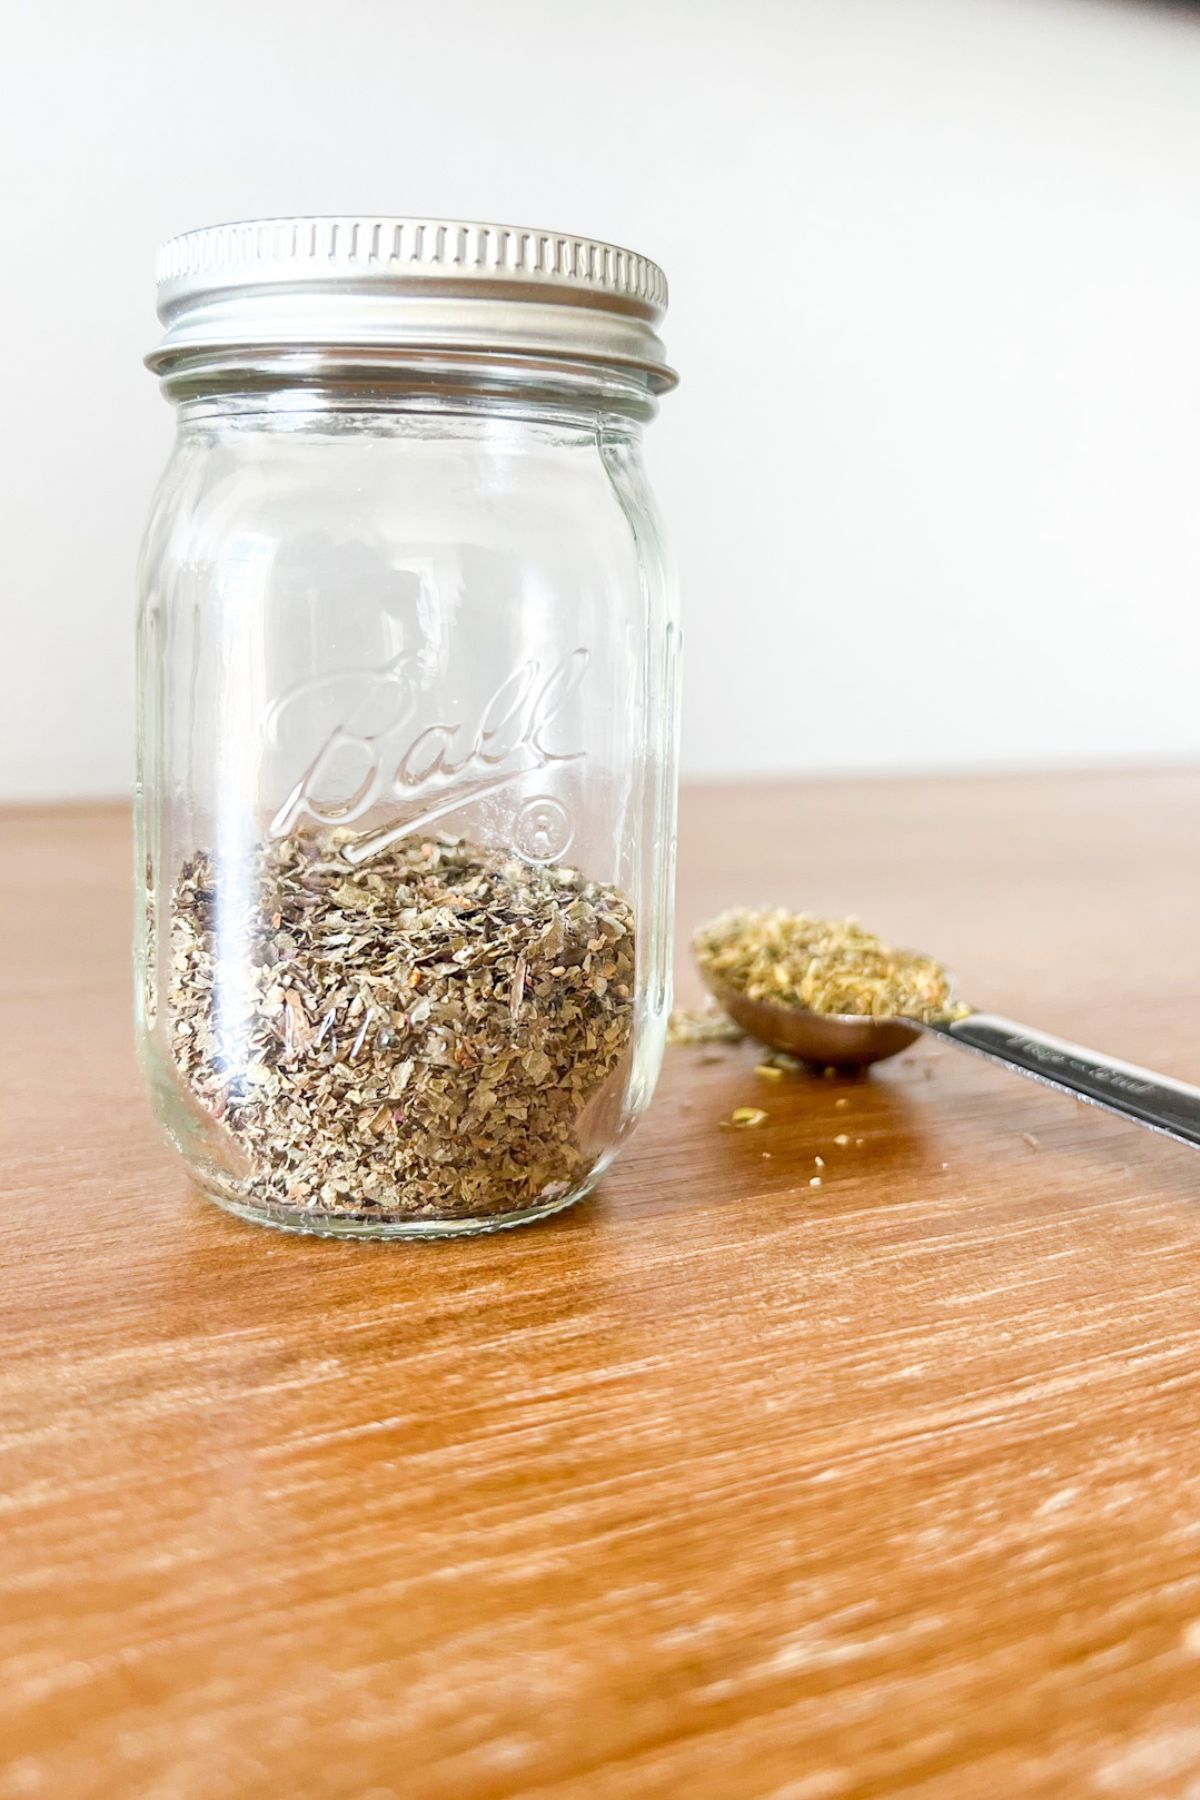 Italian seasoning in a small class jar and a measuring spoon in the background.